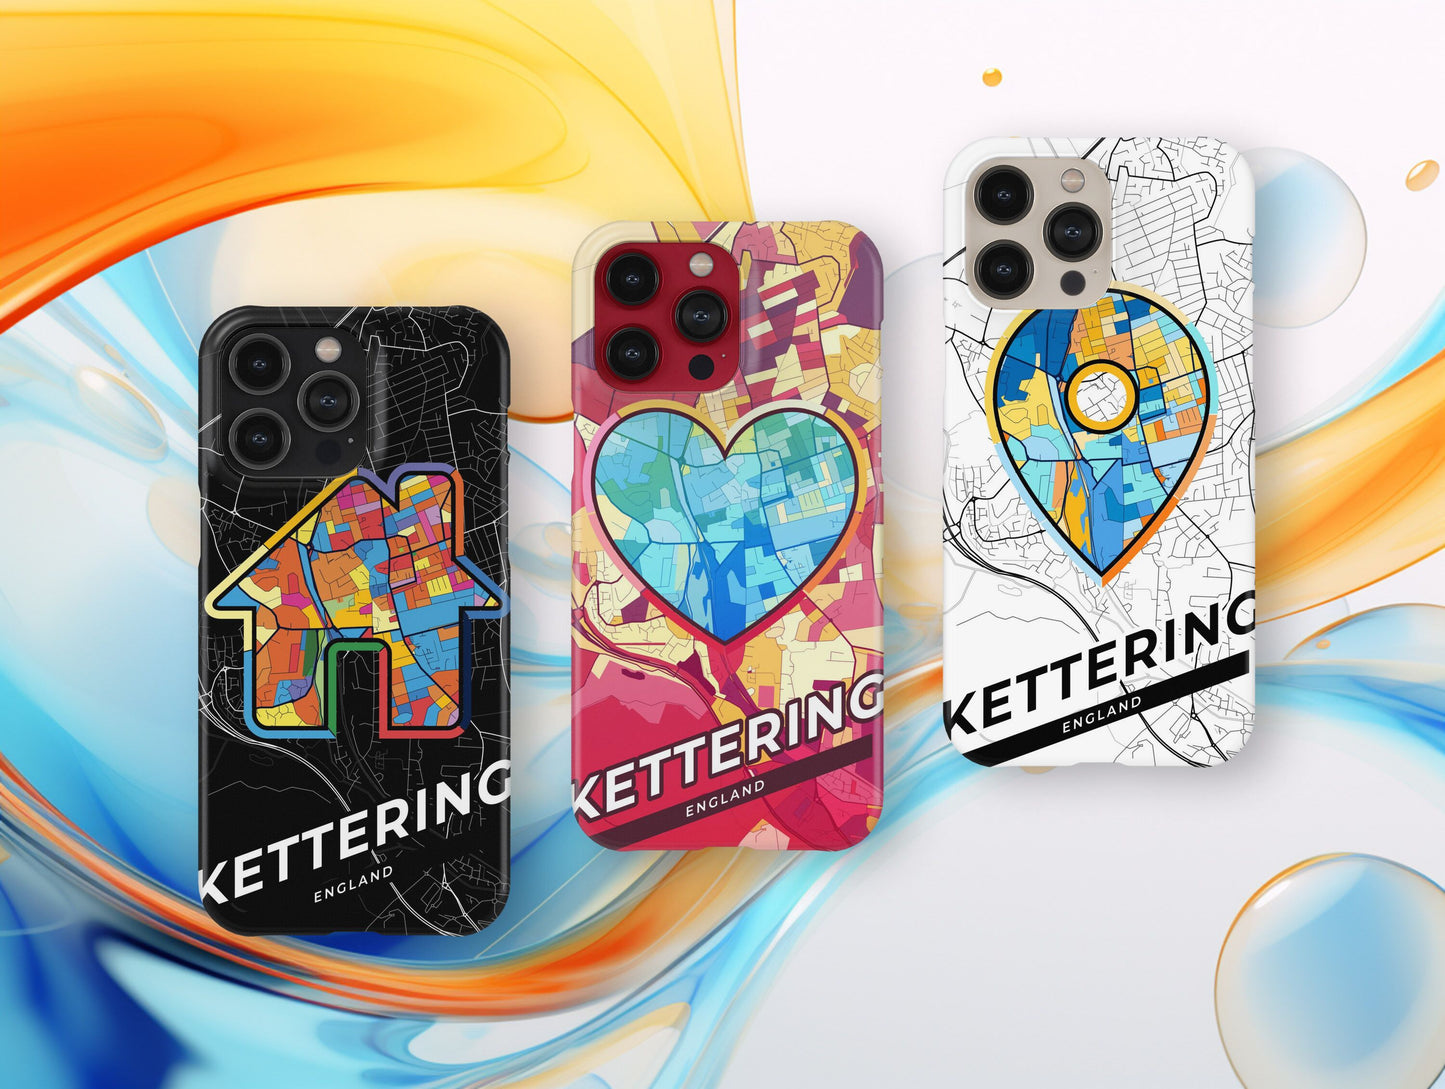 Kettering England slim phone case with colorful icon. Birthday, wedding or housewarming gift. Couple match cases.